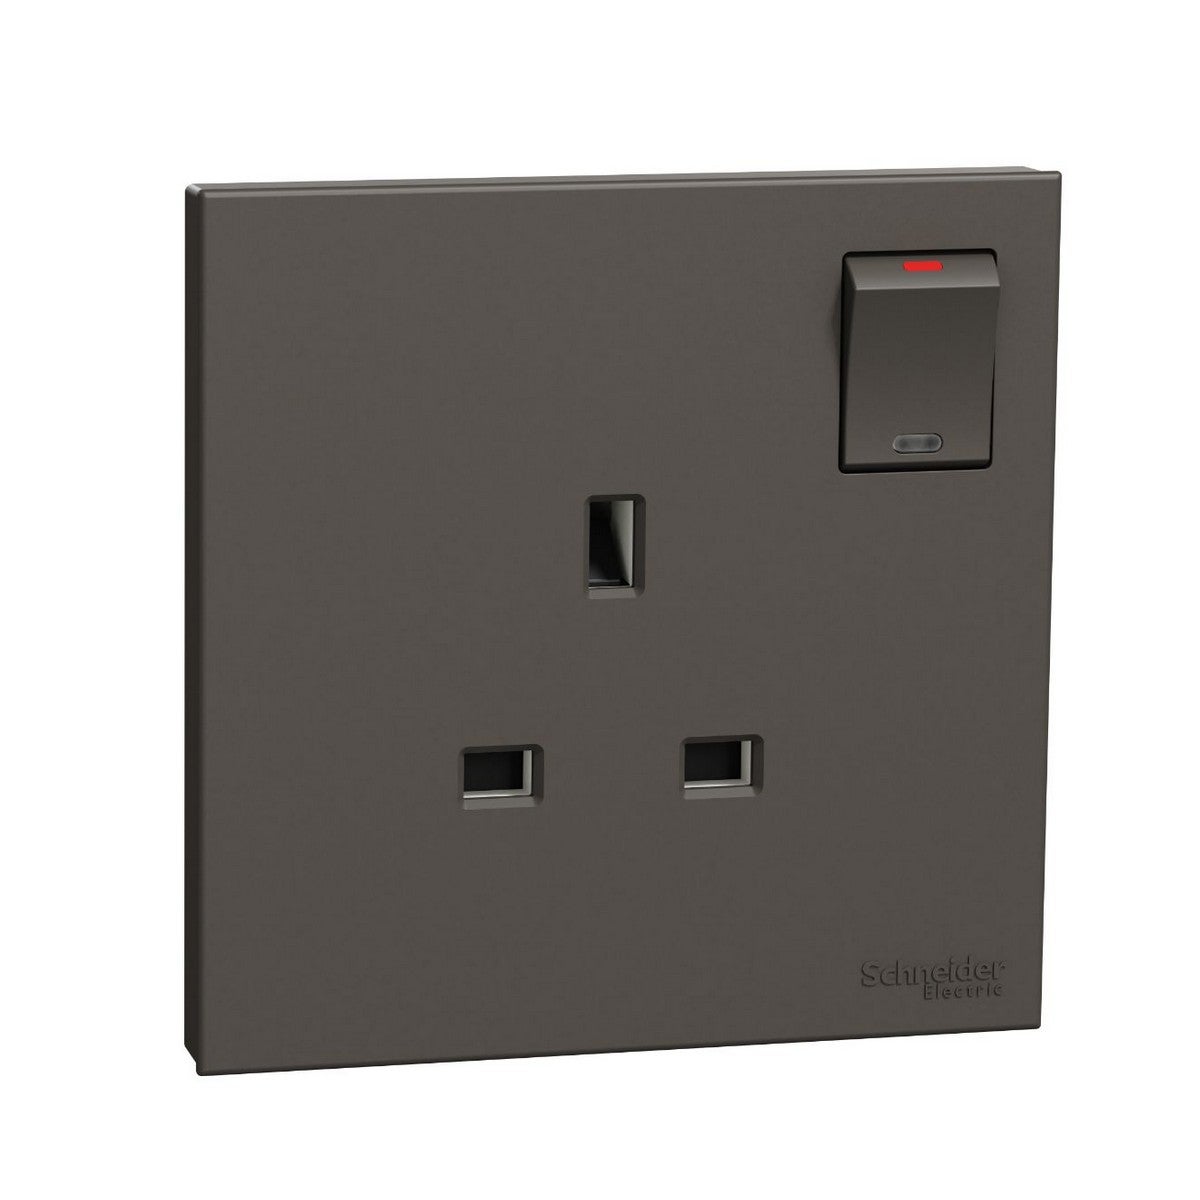 AvatarOn C, Switched socket, 13A 250V, 1 gang, with LED, dark grey